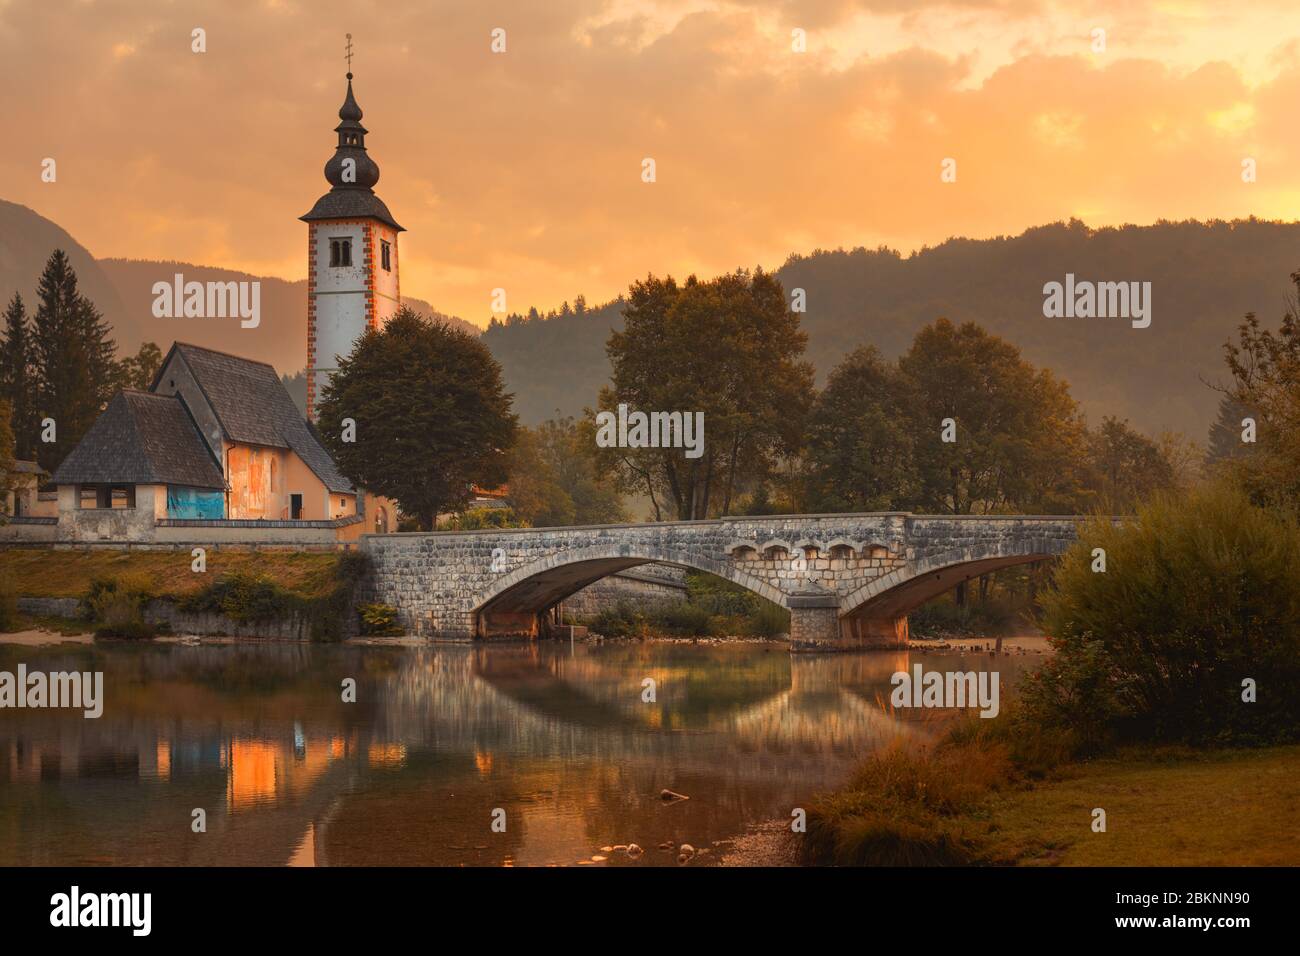 Church of St. John the Baptist and medieval stone bridge at lake Bohinj, Slovenia. Image is taken in early morning of august. Stock Photo